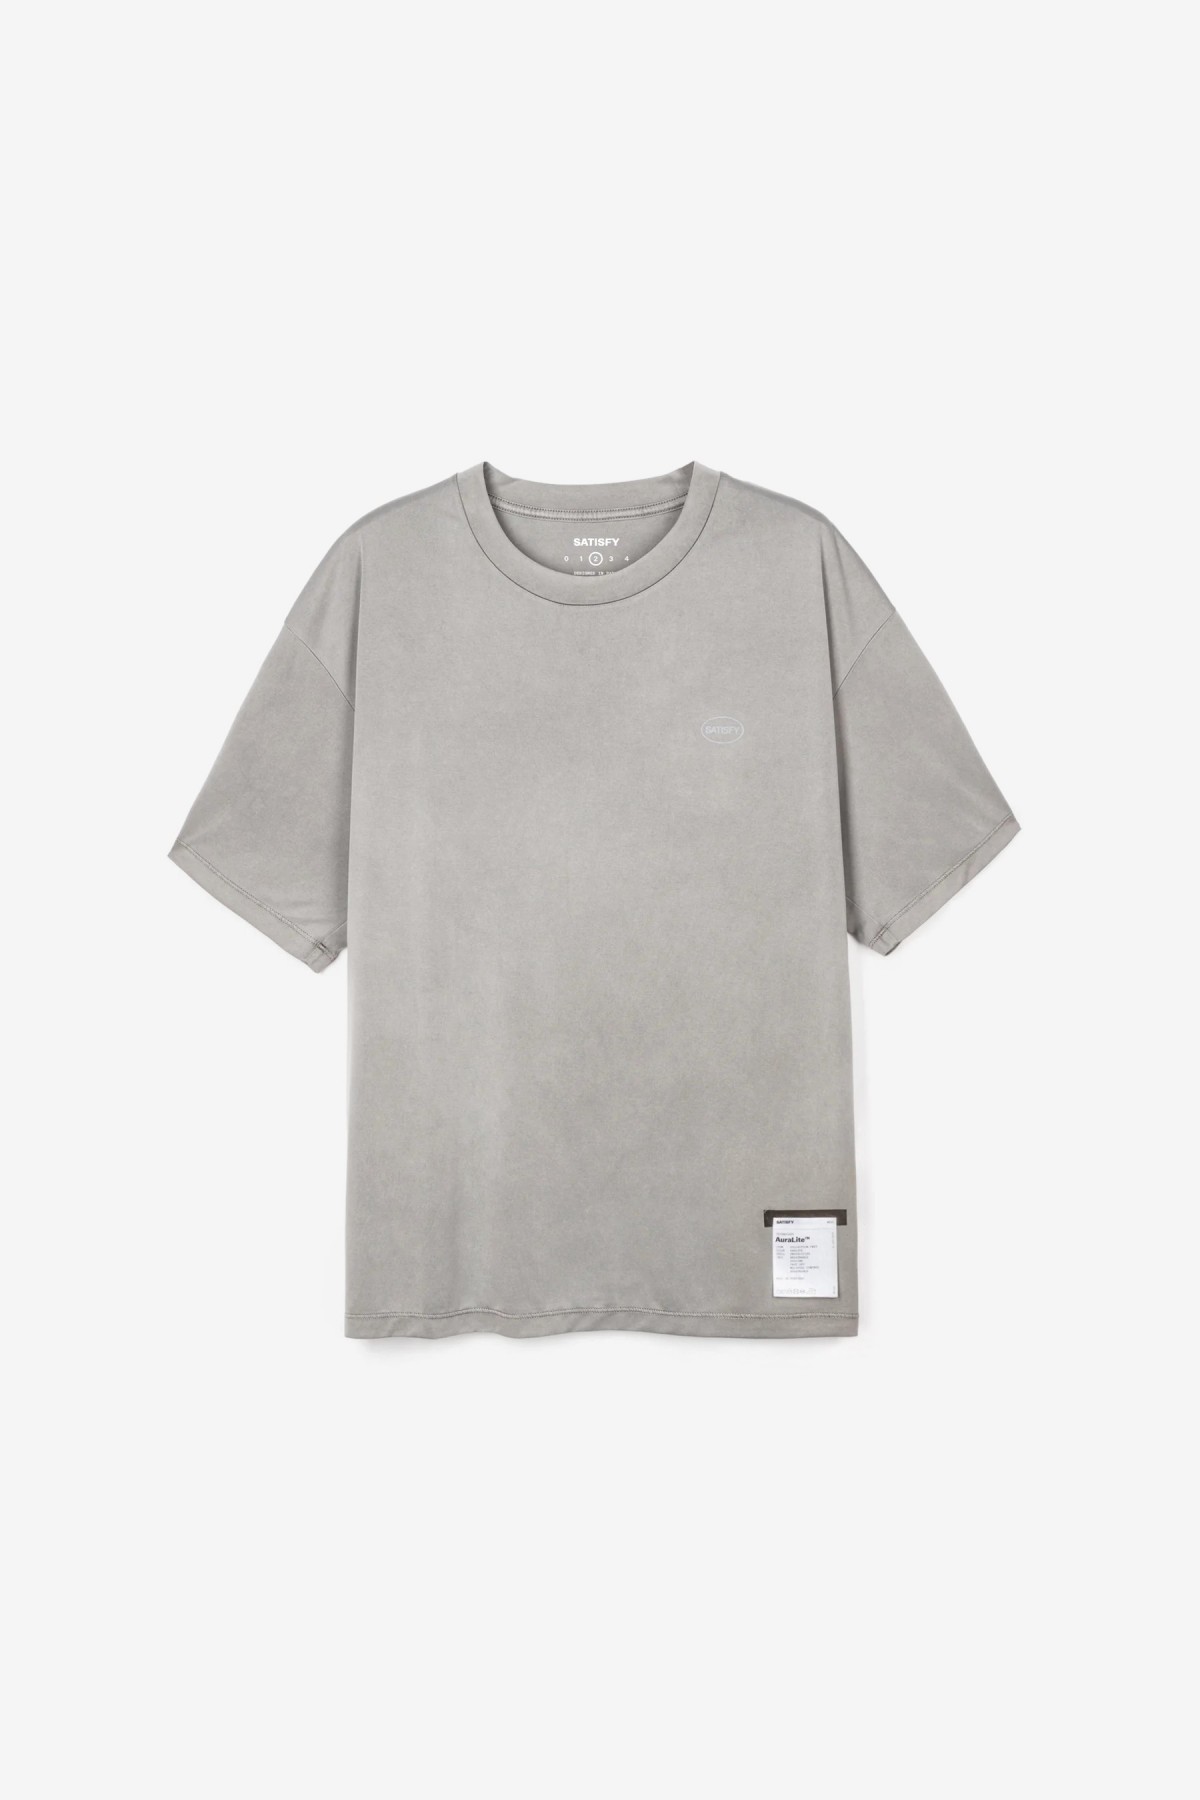 Satisfy Running AuraLite T-Shirt in Mineral Fossil